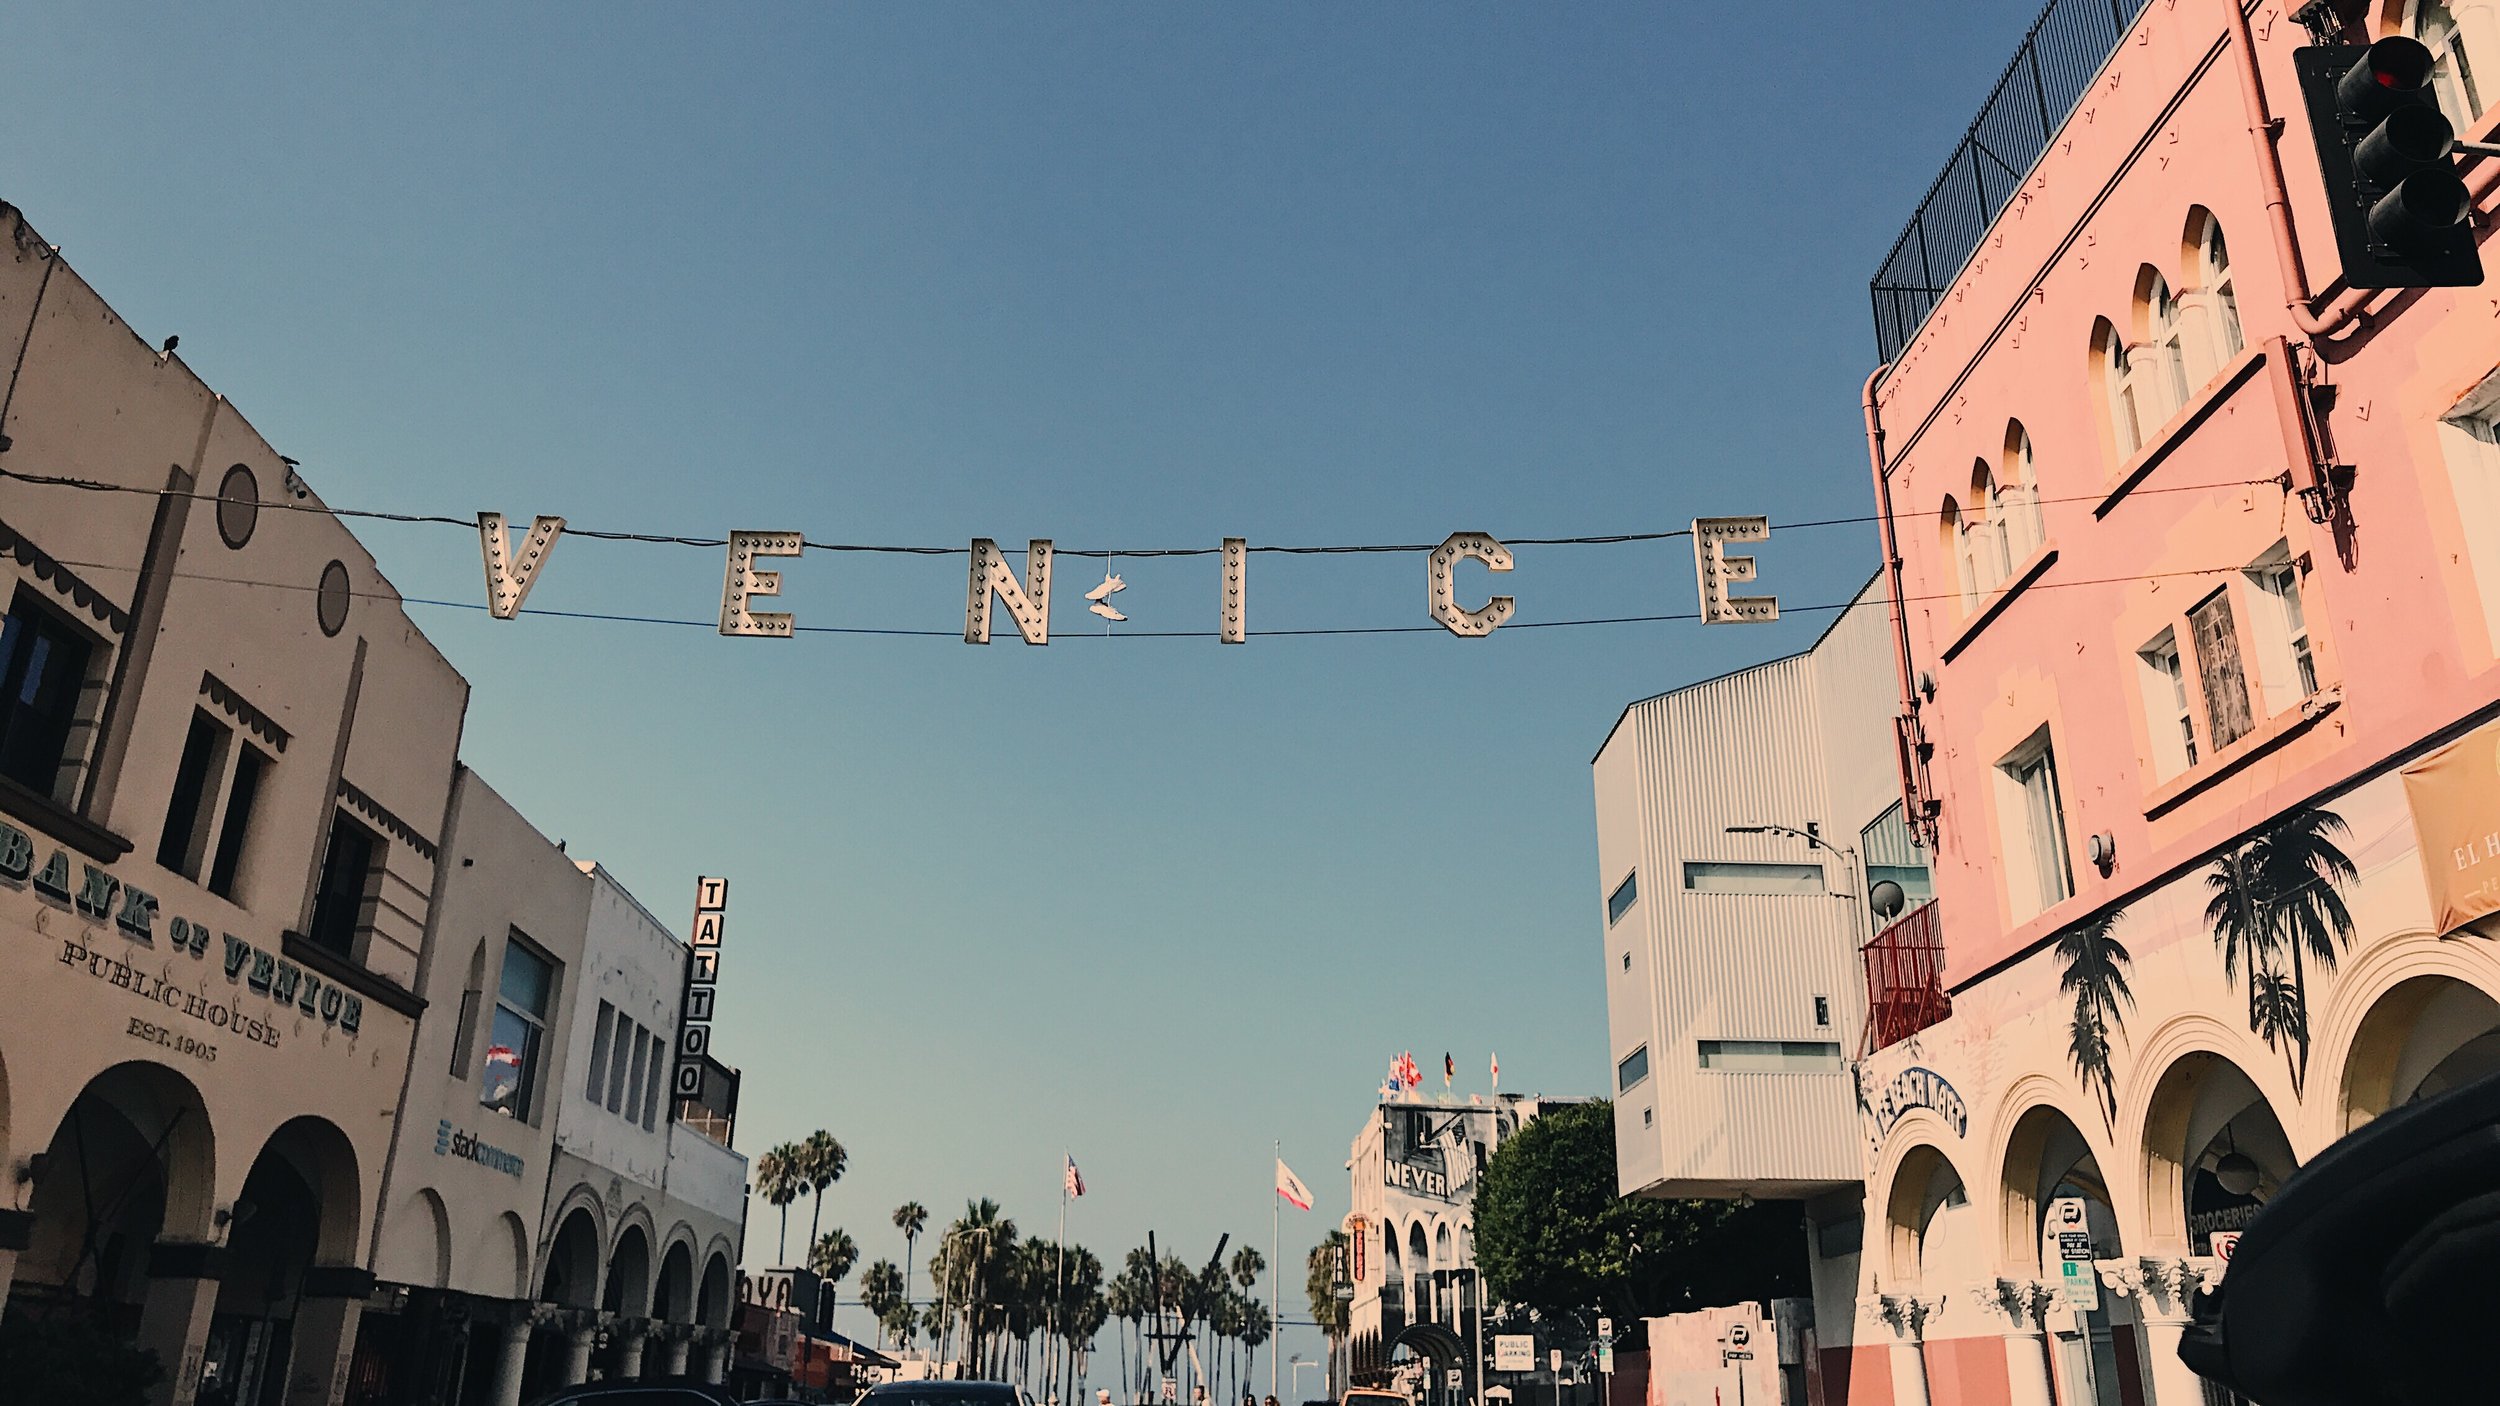 Los Angeles Travel Guide - Insiders Tips for Exploring LA image asset